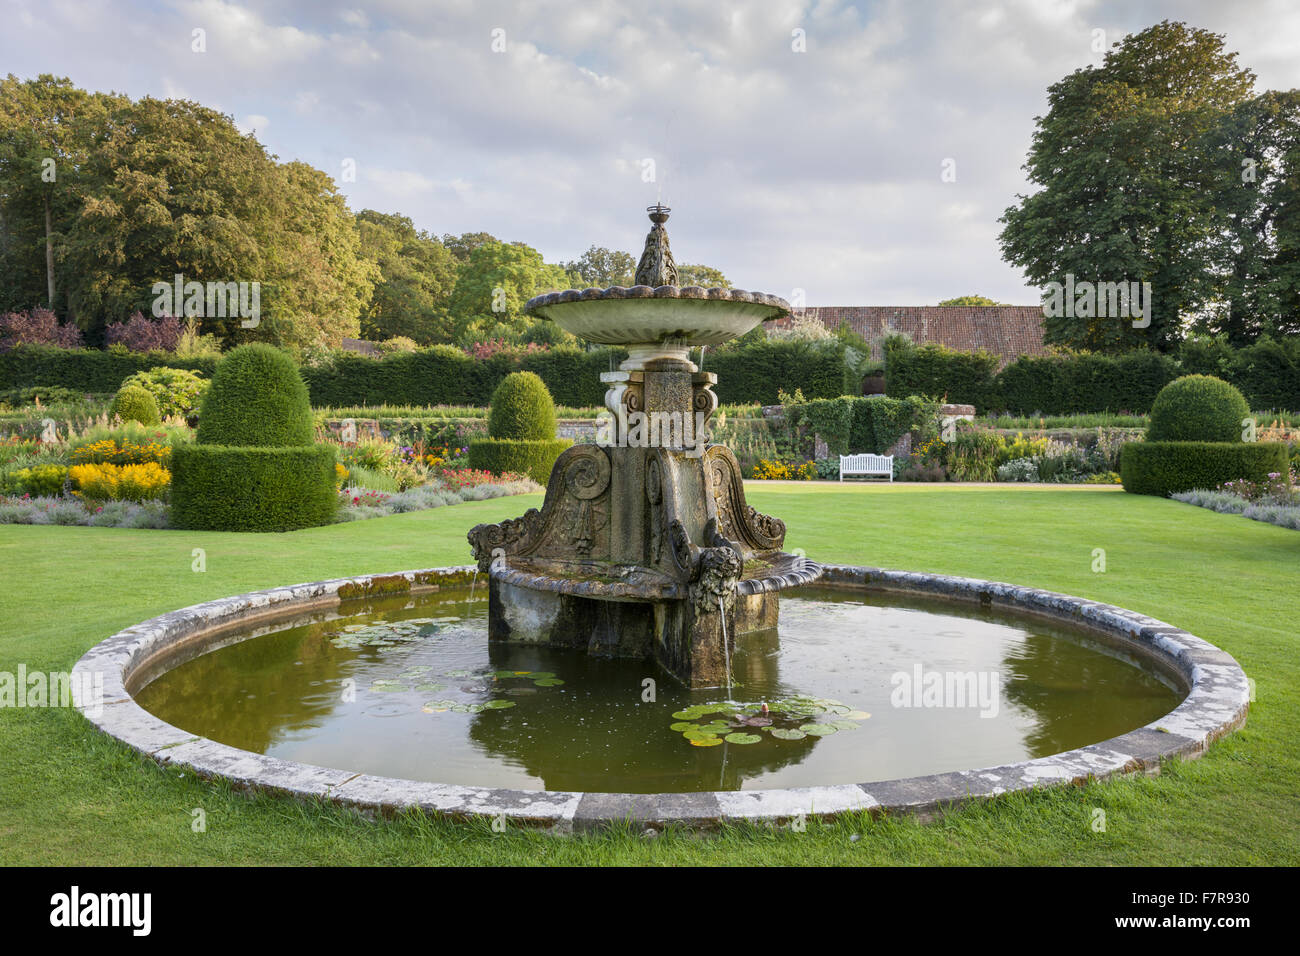 The Fountain at Blickling Estate, Norfolk. Blickling is a turreted red-brick Jacobean mansion, sitting within beautiful gardens and parkland. Stock Photo